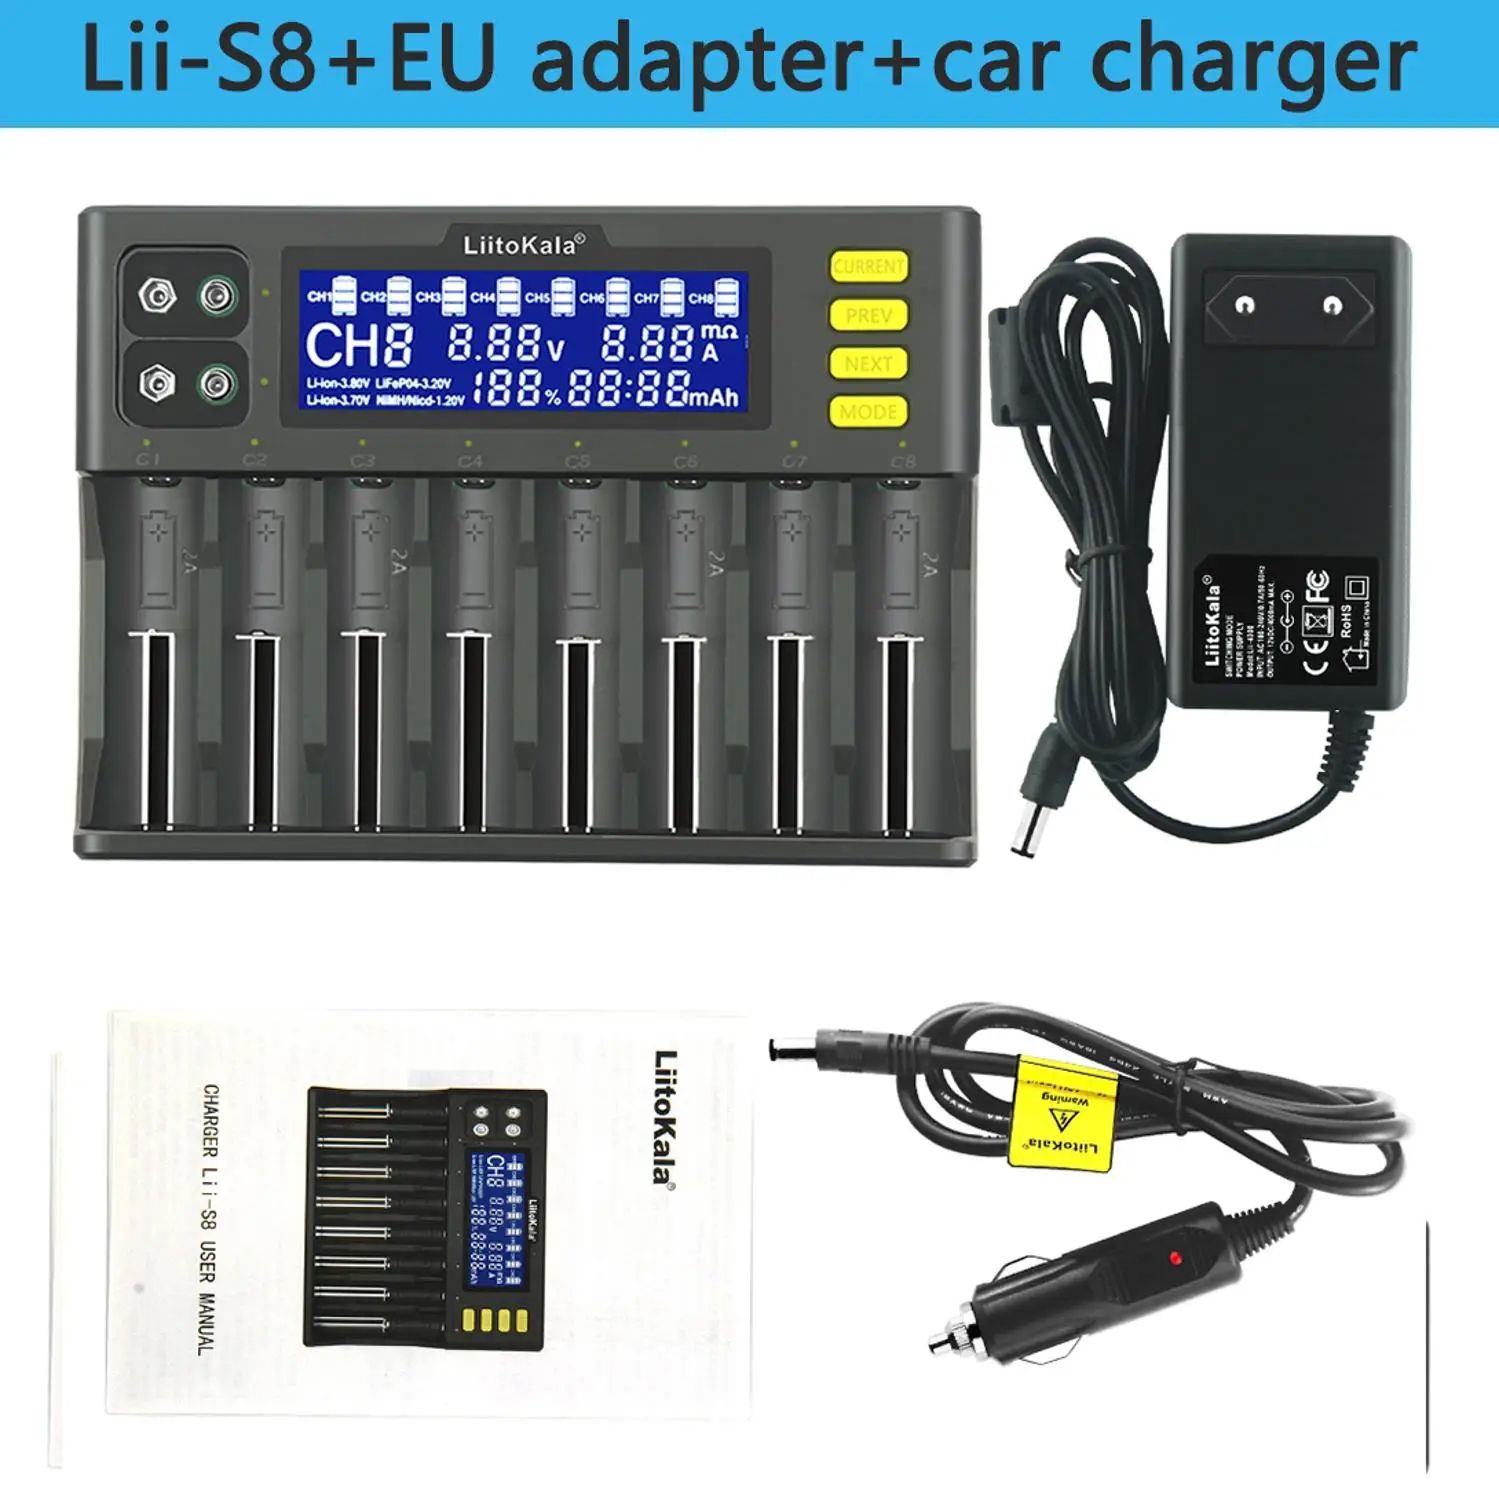 Lii-S8 and car